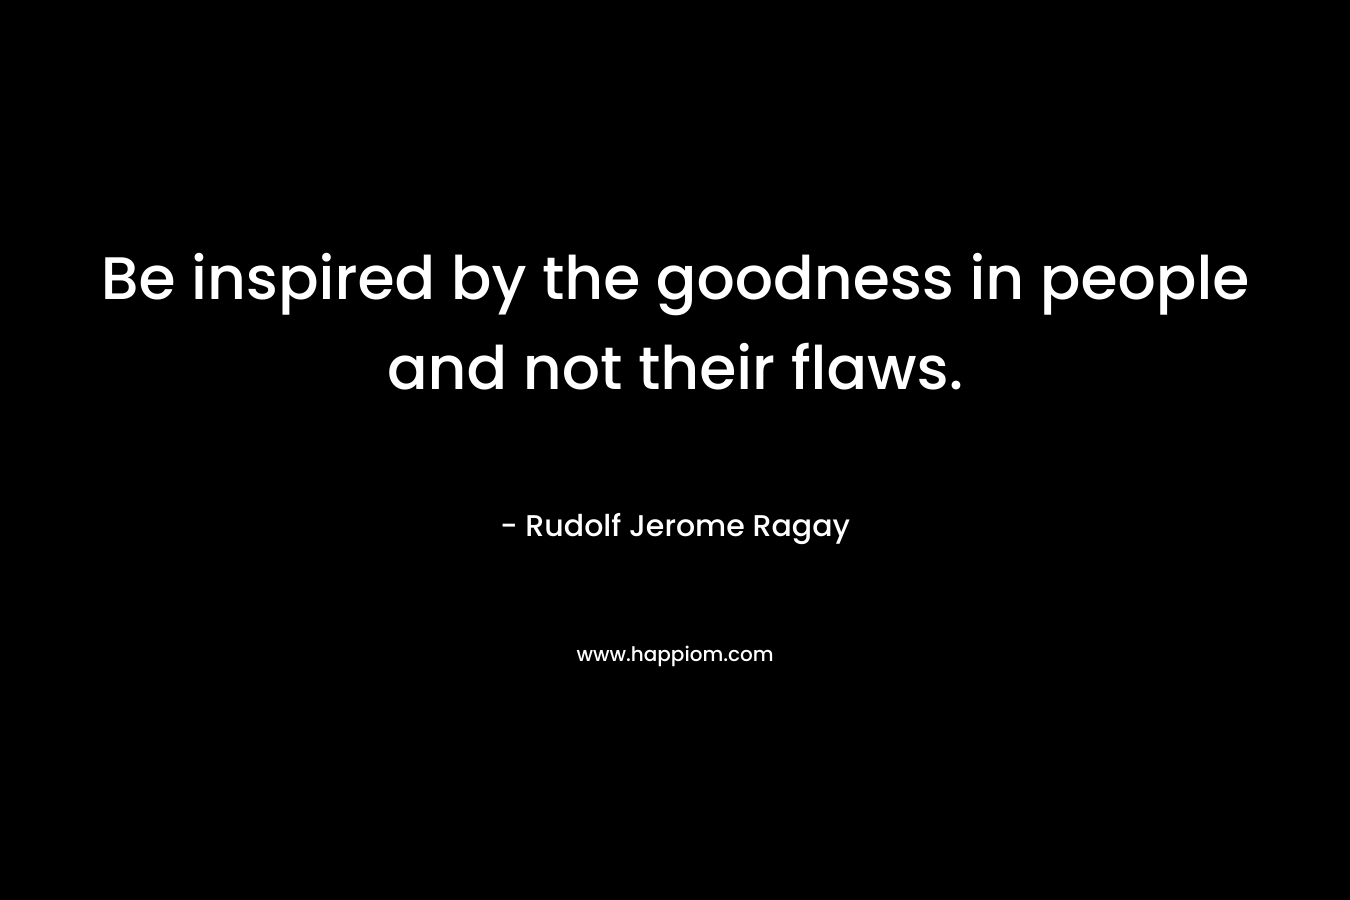 Be inspired by the goodness in people and not their flaws. – Rudolf Jerome Ragay